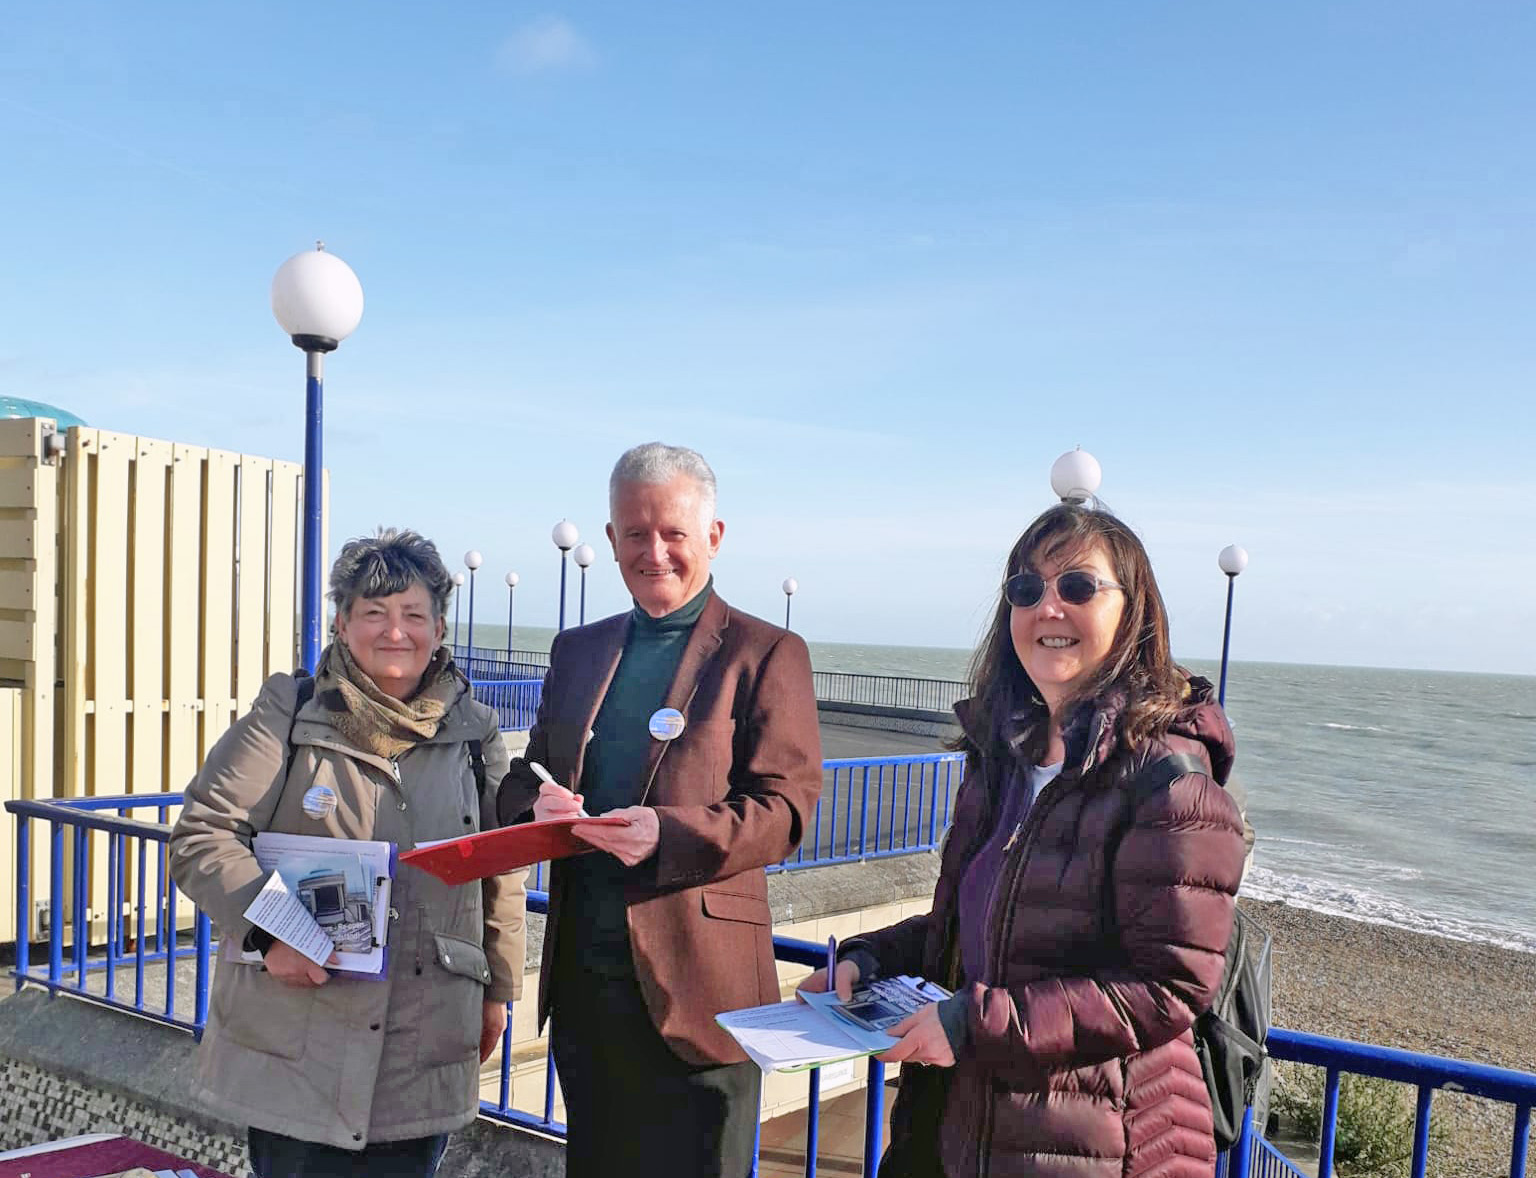 Bandstand petition